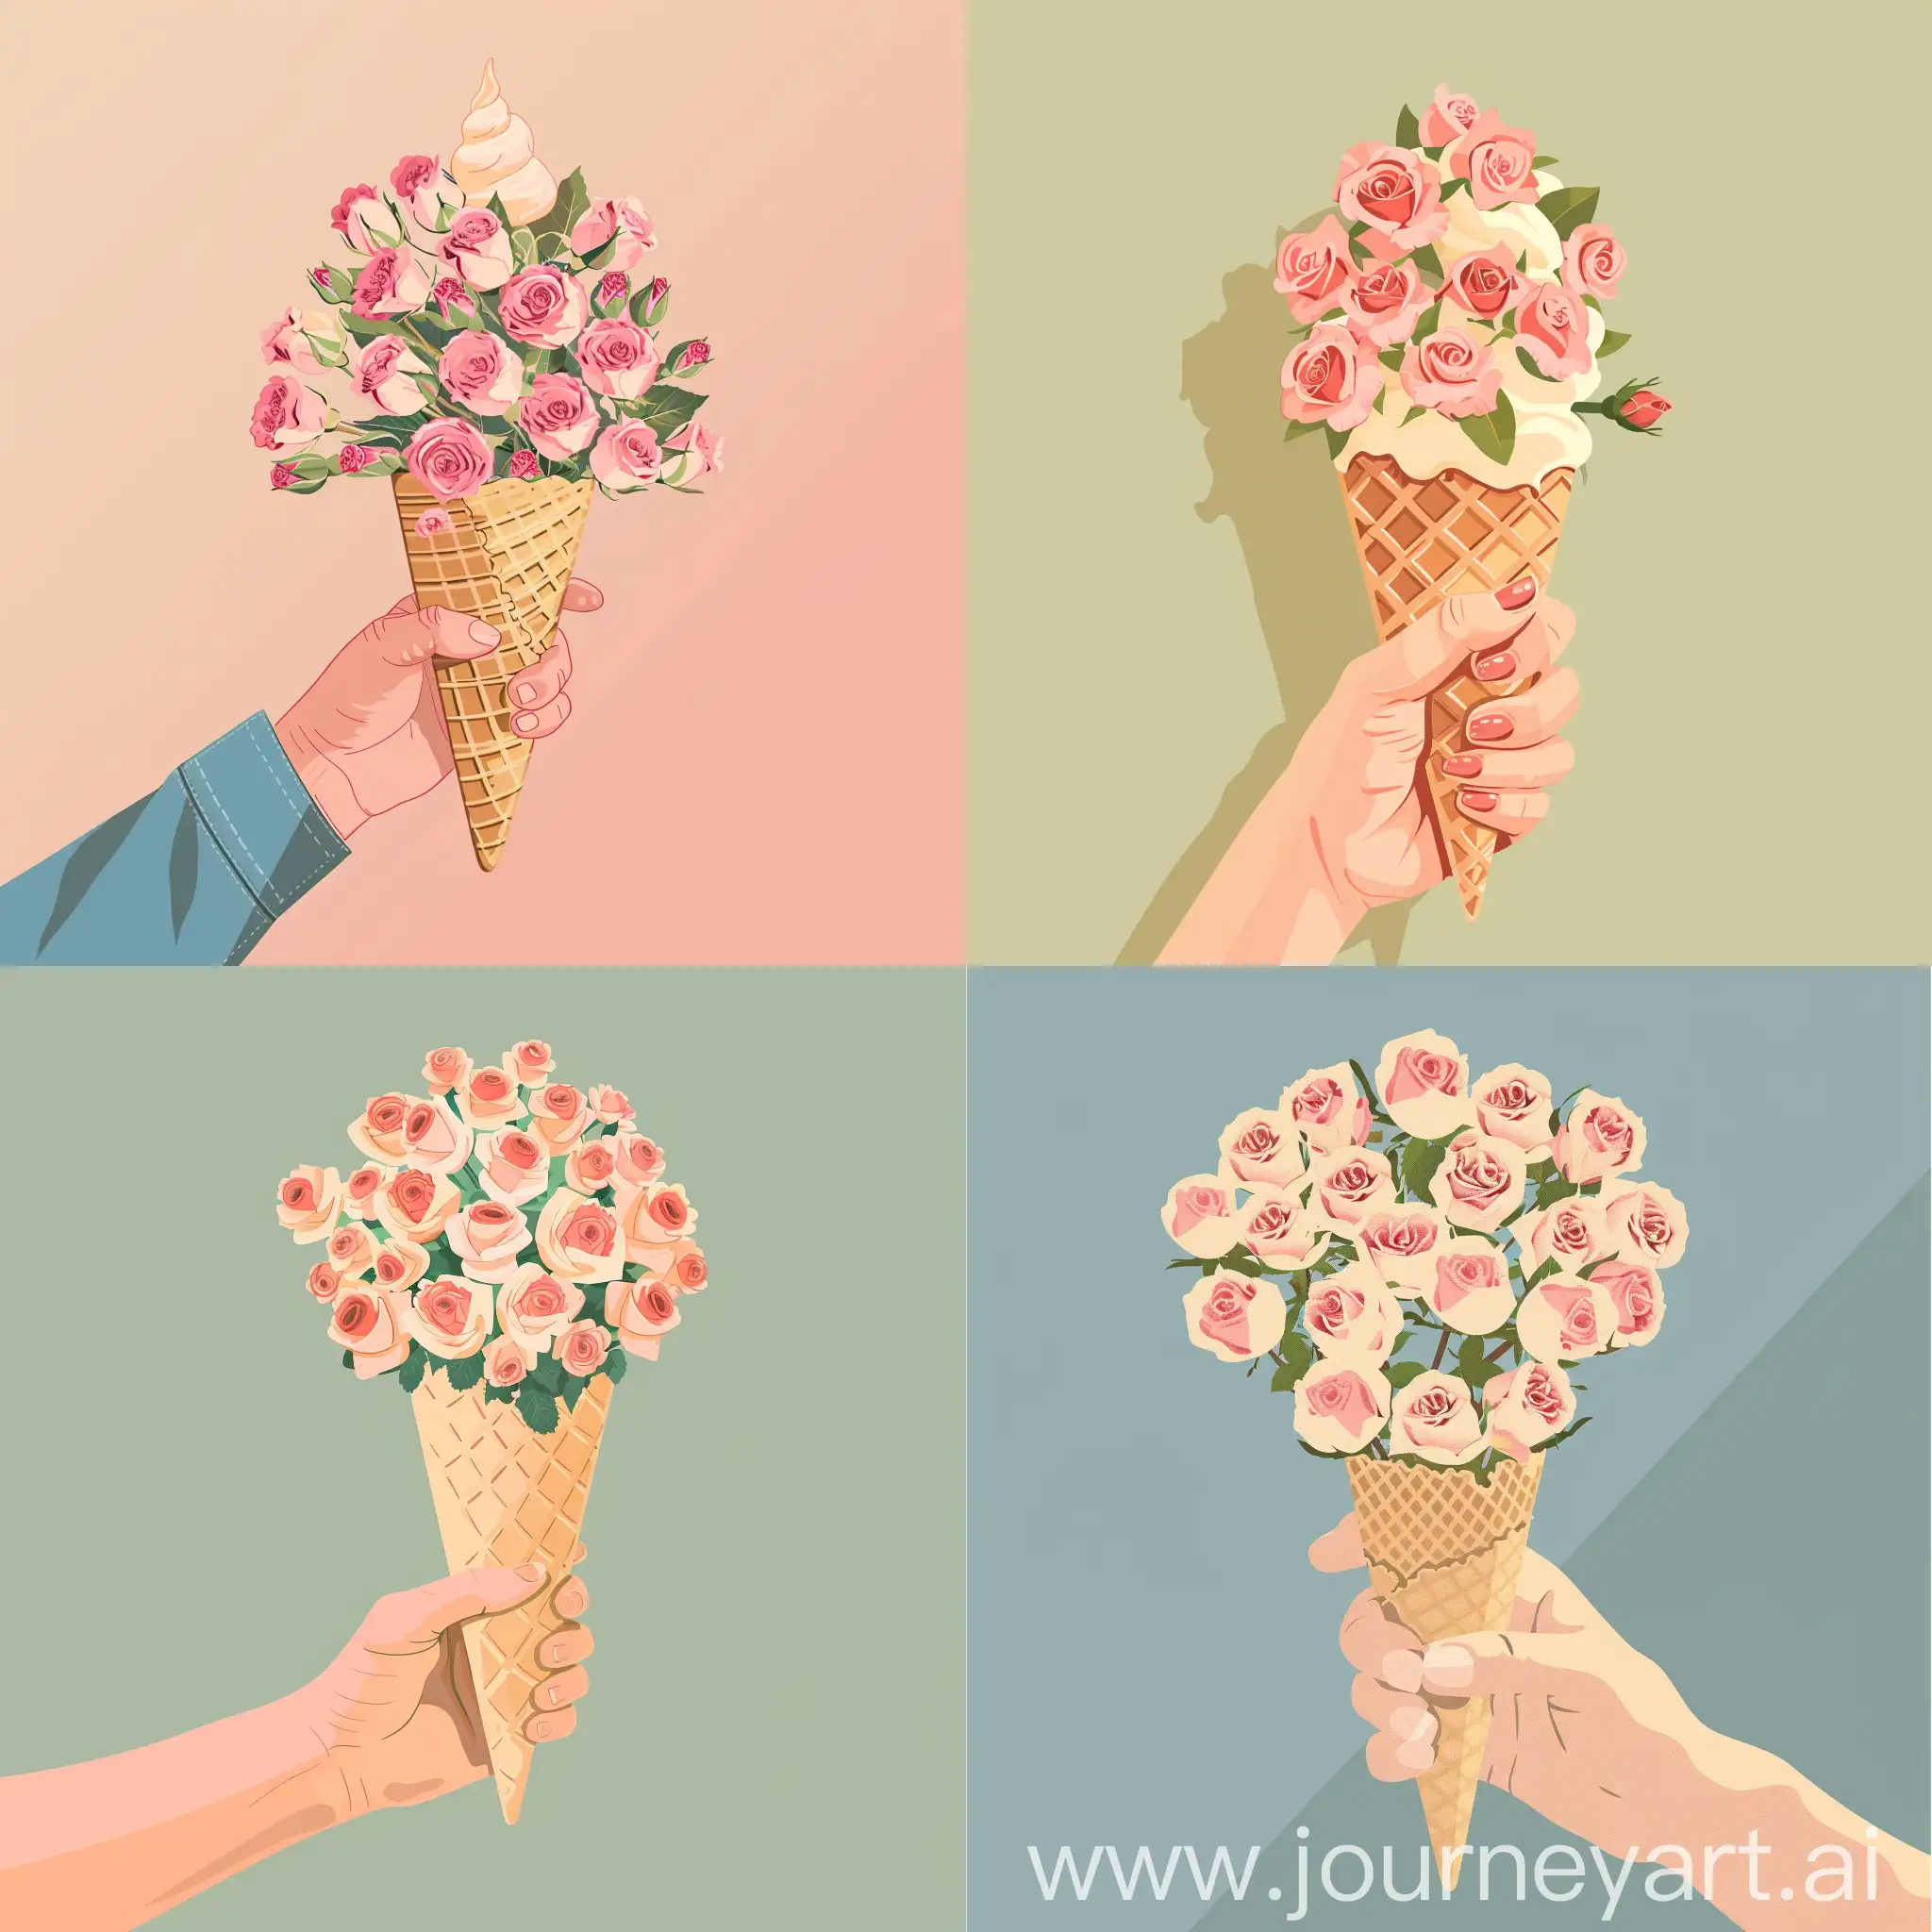 Flat illustration of A nice hand holding an ice cream cone is full of small roses flowers inside it, high quality detailes